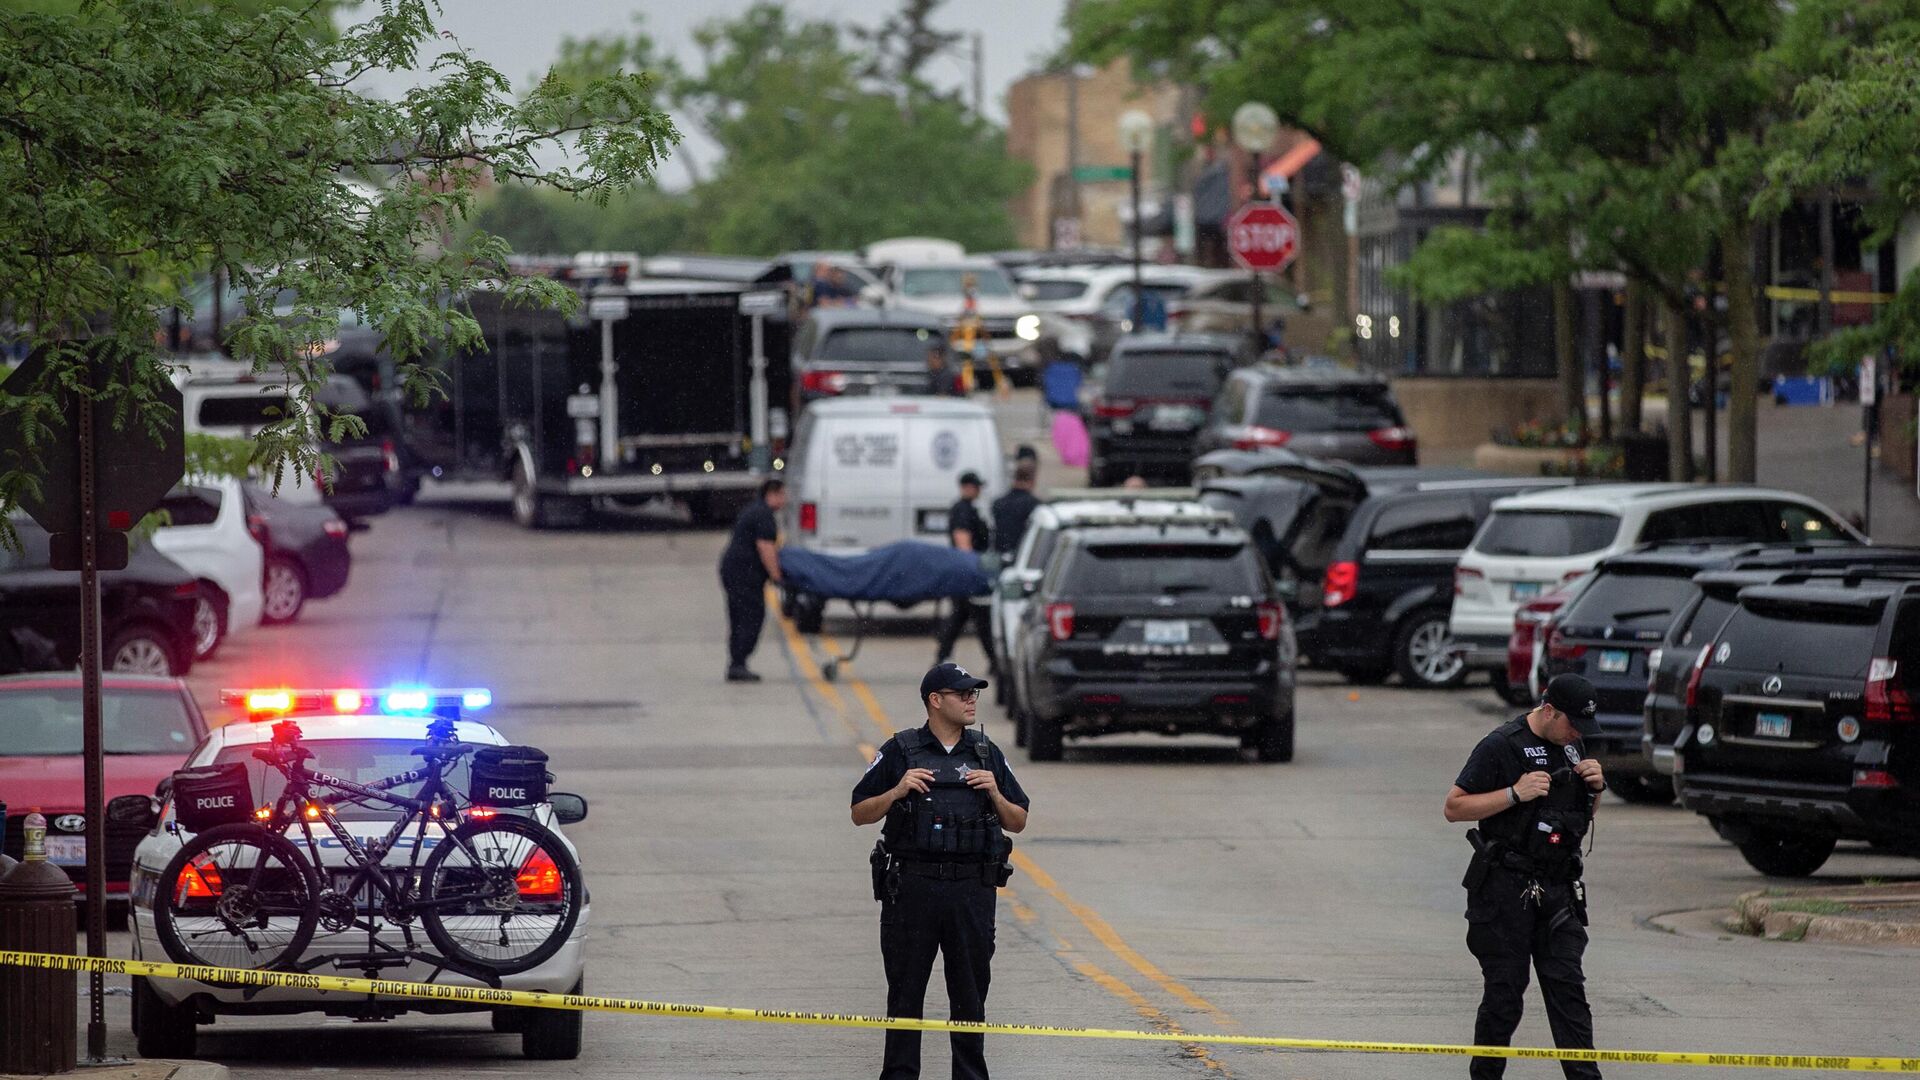 HIGHLAND PARK, IL - JULY 04: First responders take away victims from the scene of a mass shooting at a Fourth of July parade on July 4, 2022 in Highland Park, Illinois. At least six people were killed and 19 injured, according to published reports - Sputnik International, 1920, 05.07.2022